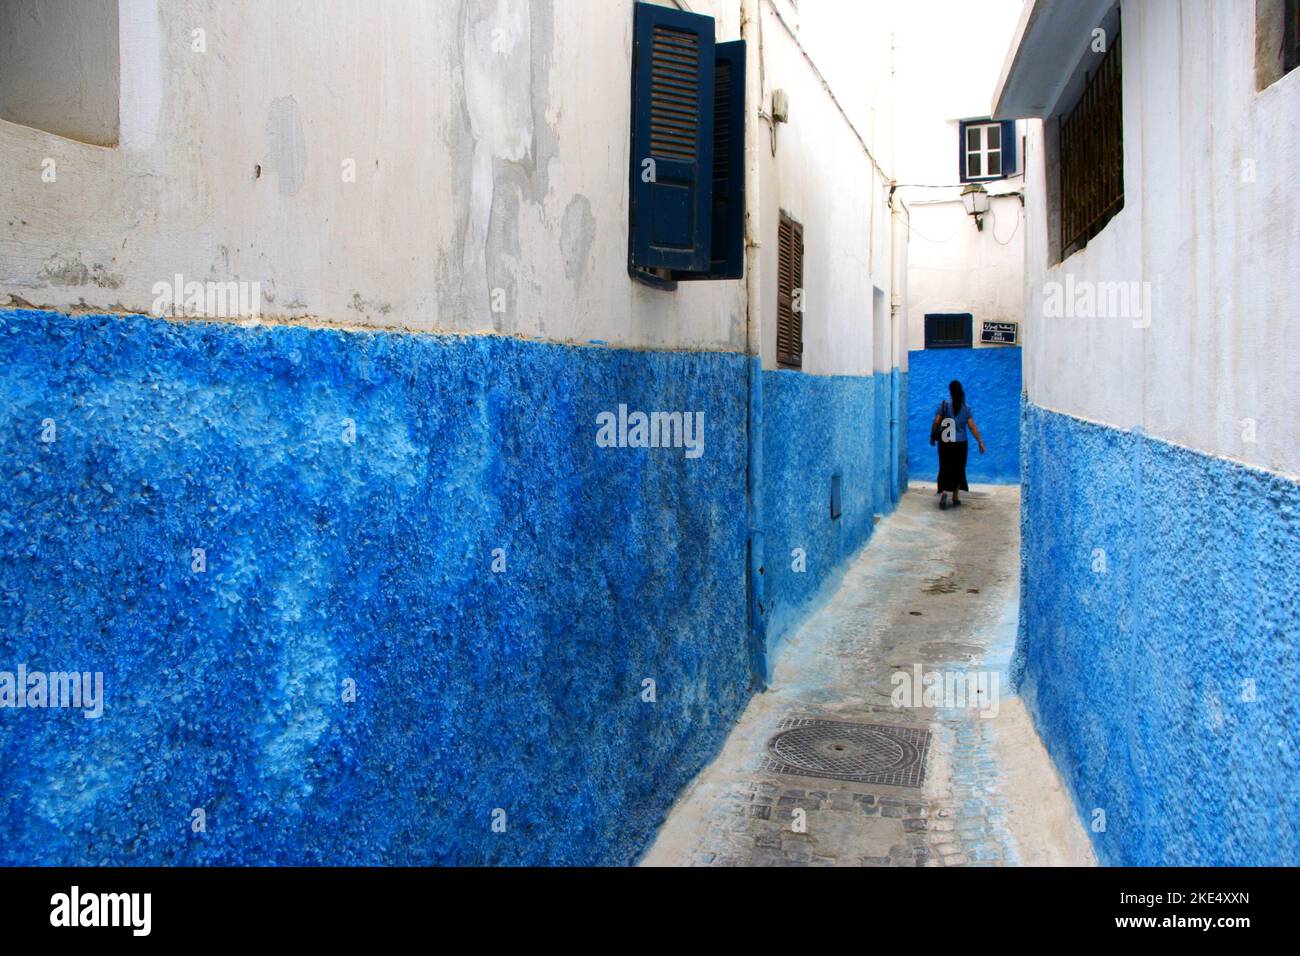 Pedestrian in a narrow street painted in blue and white, Kasbah of the Udayas, Kasbah of the Oudaias, Rabat, Morocco Stock Photo